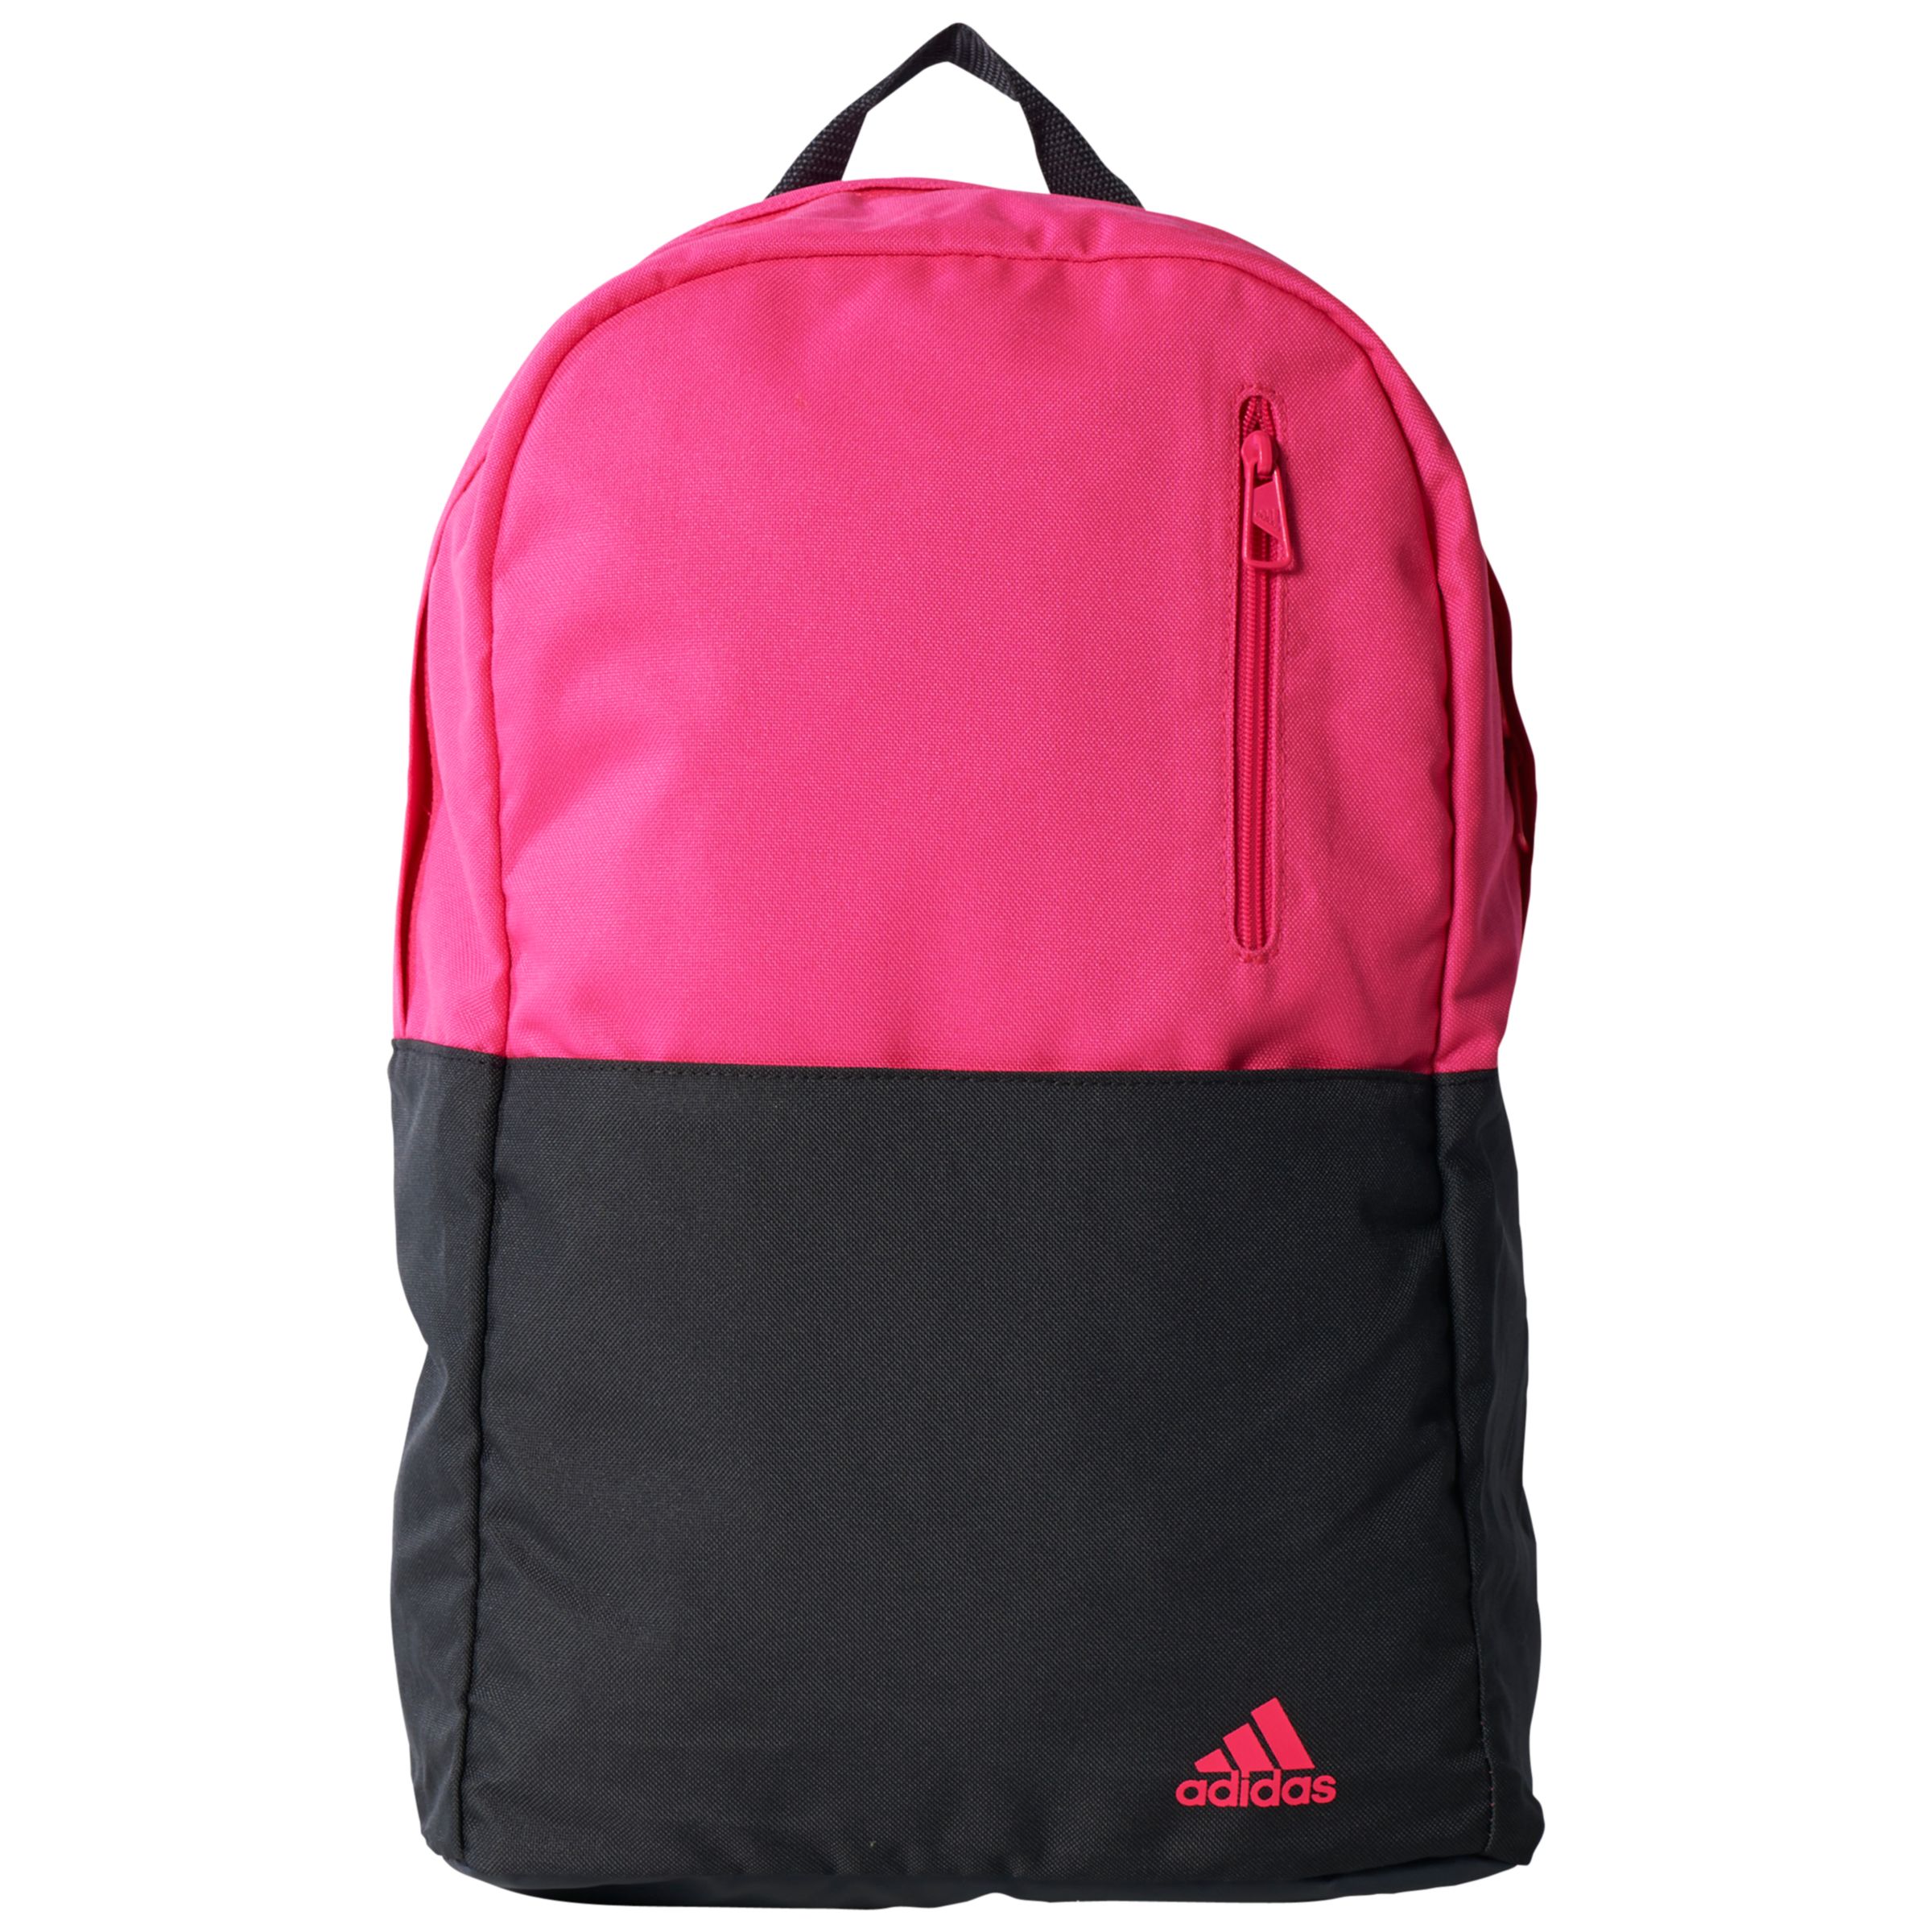 adidas pink and black backpack